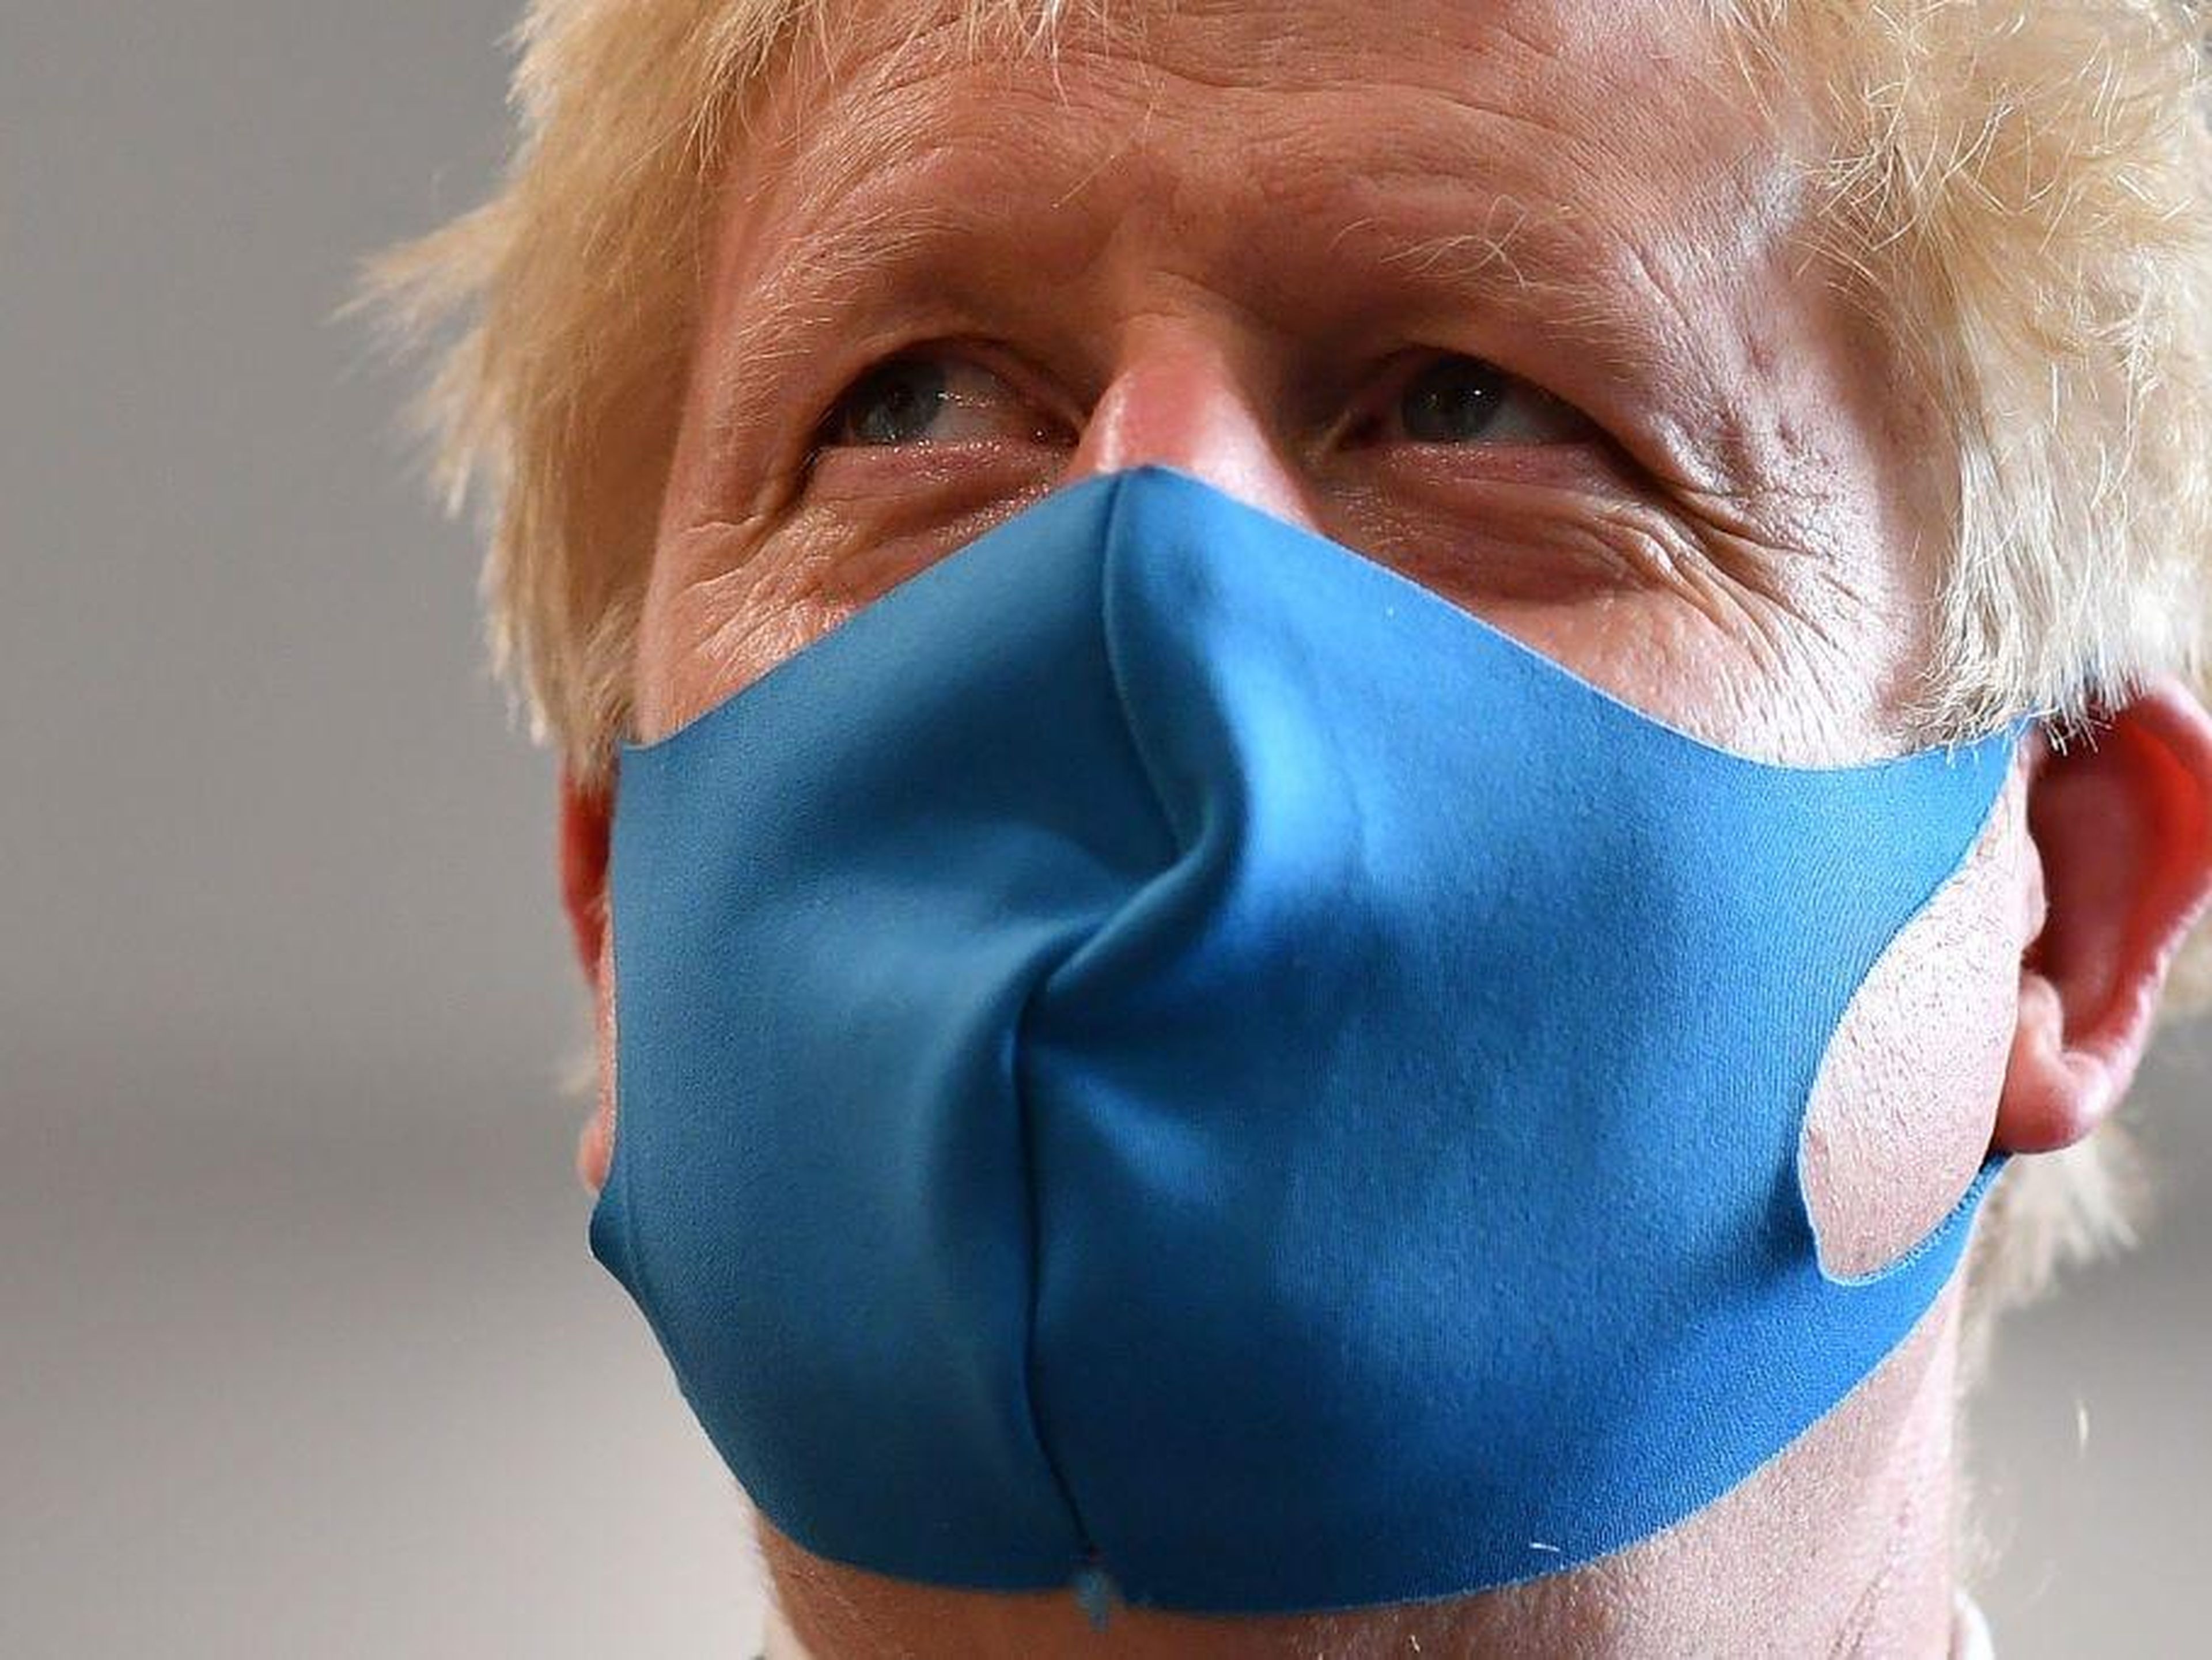 Britain's Prime Minister Boris Johnson, wearing a face mask or covering due to the COVID-19 pandemic, visits the headquarters of the London Ambulance Service NHS Trust on July 13, 2020 in London, England. Getty